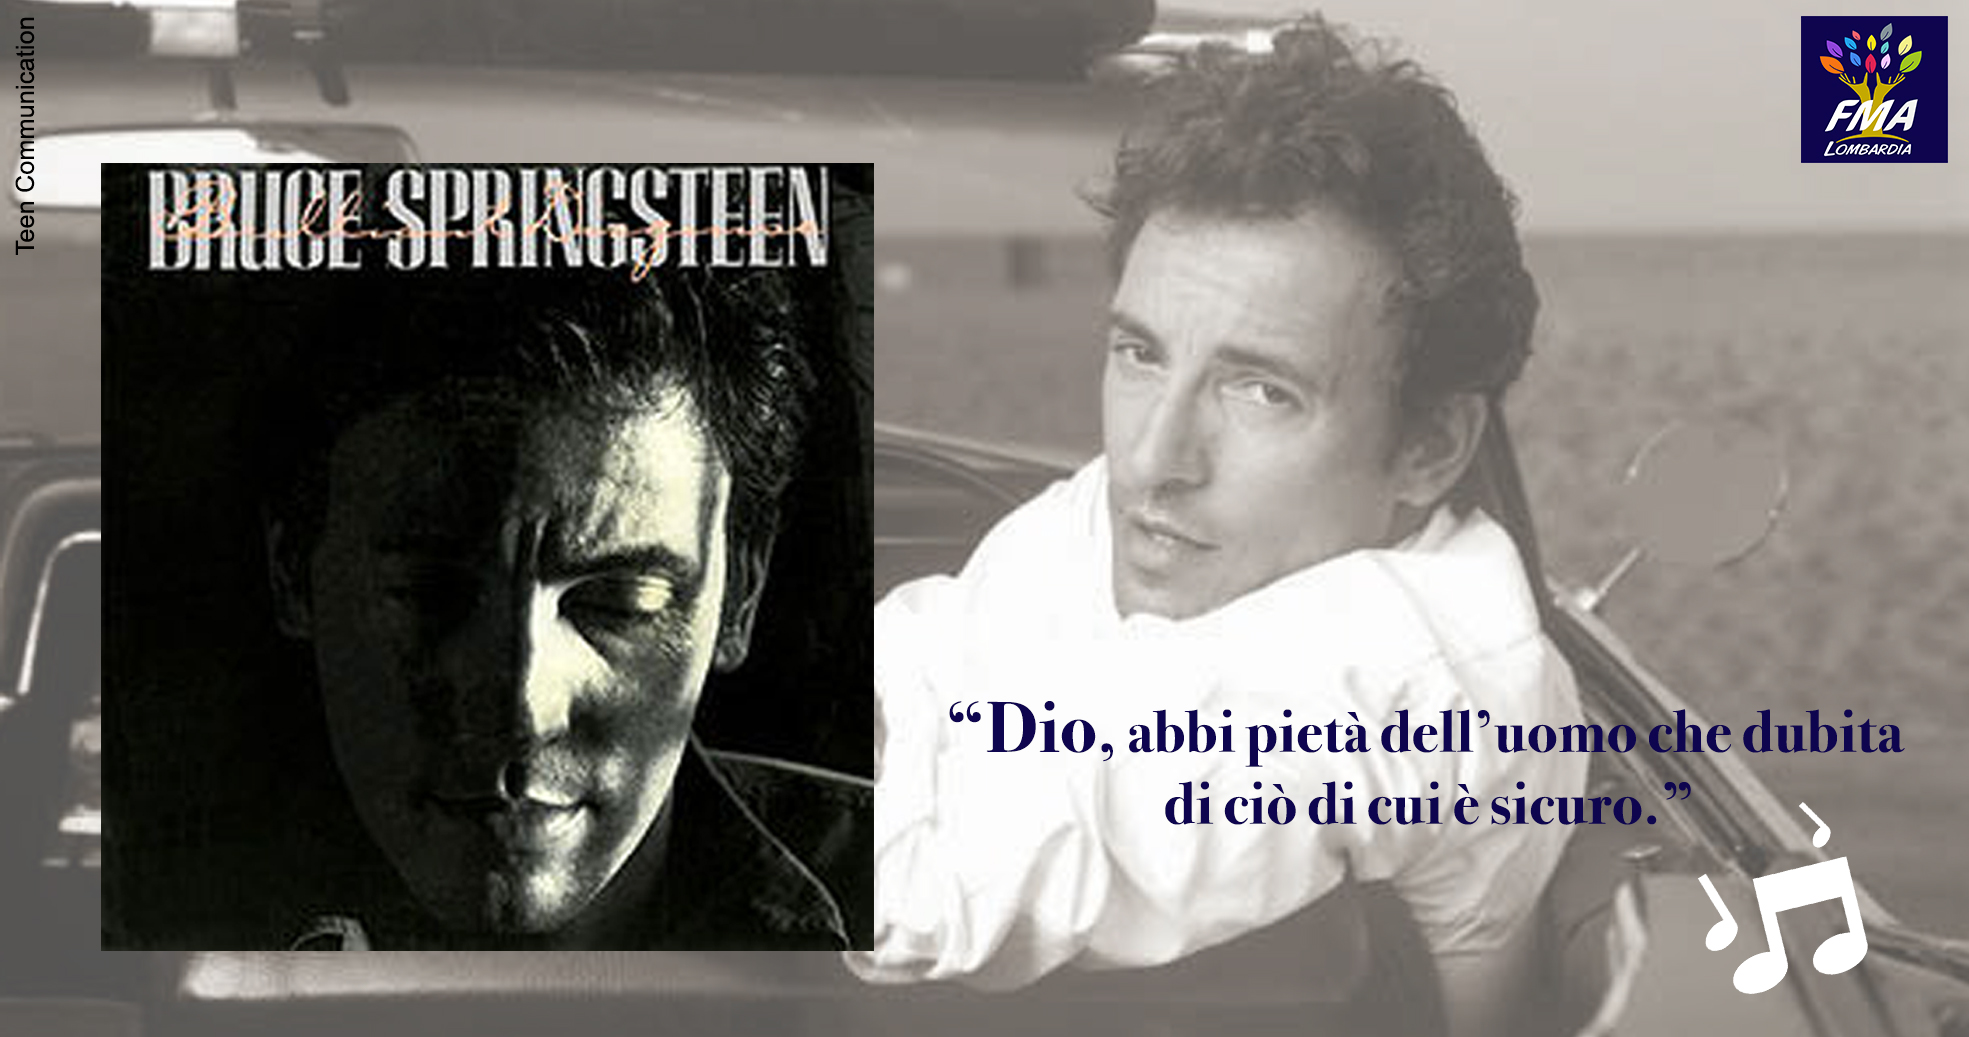 Brilliant Disguise | Bruce Springsteen